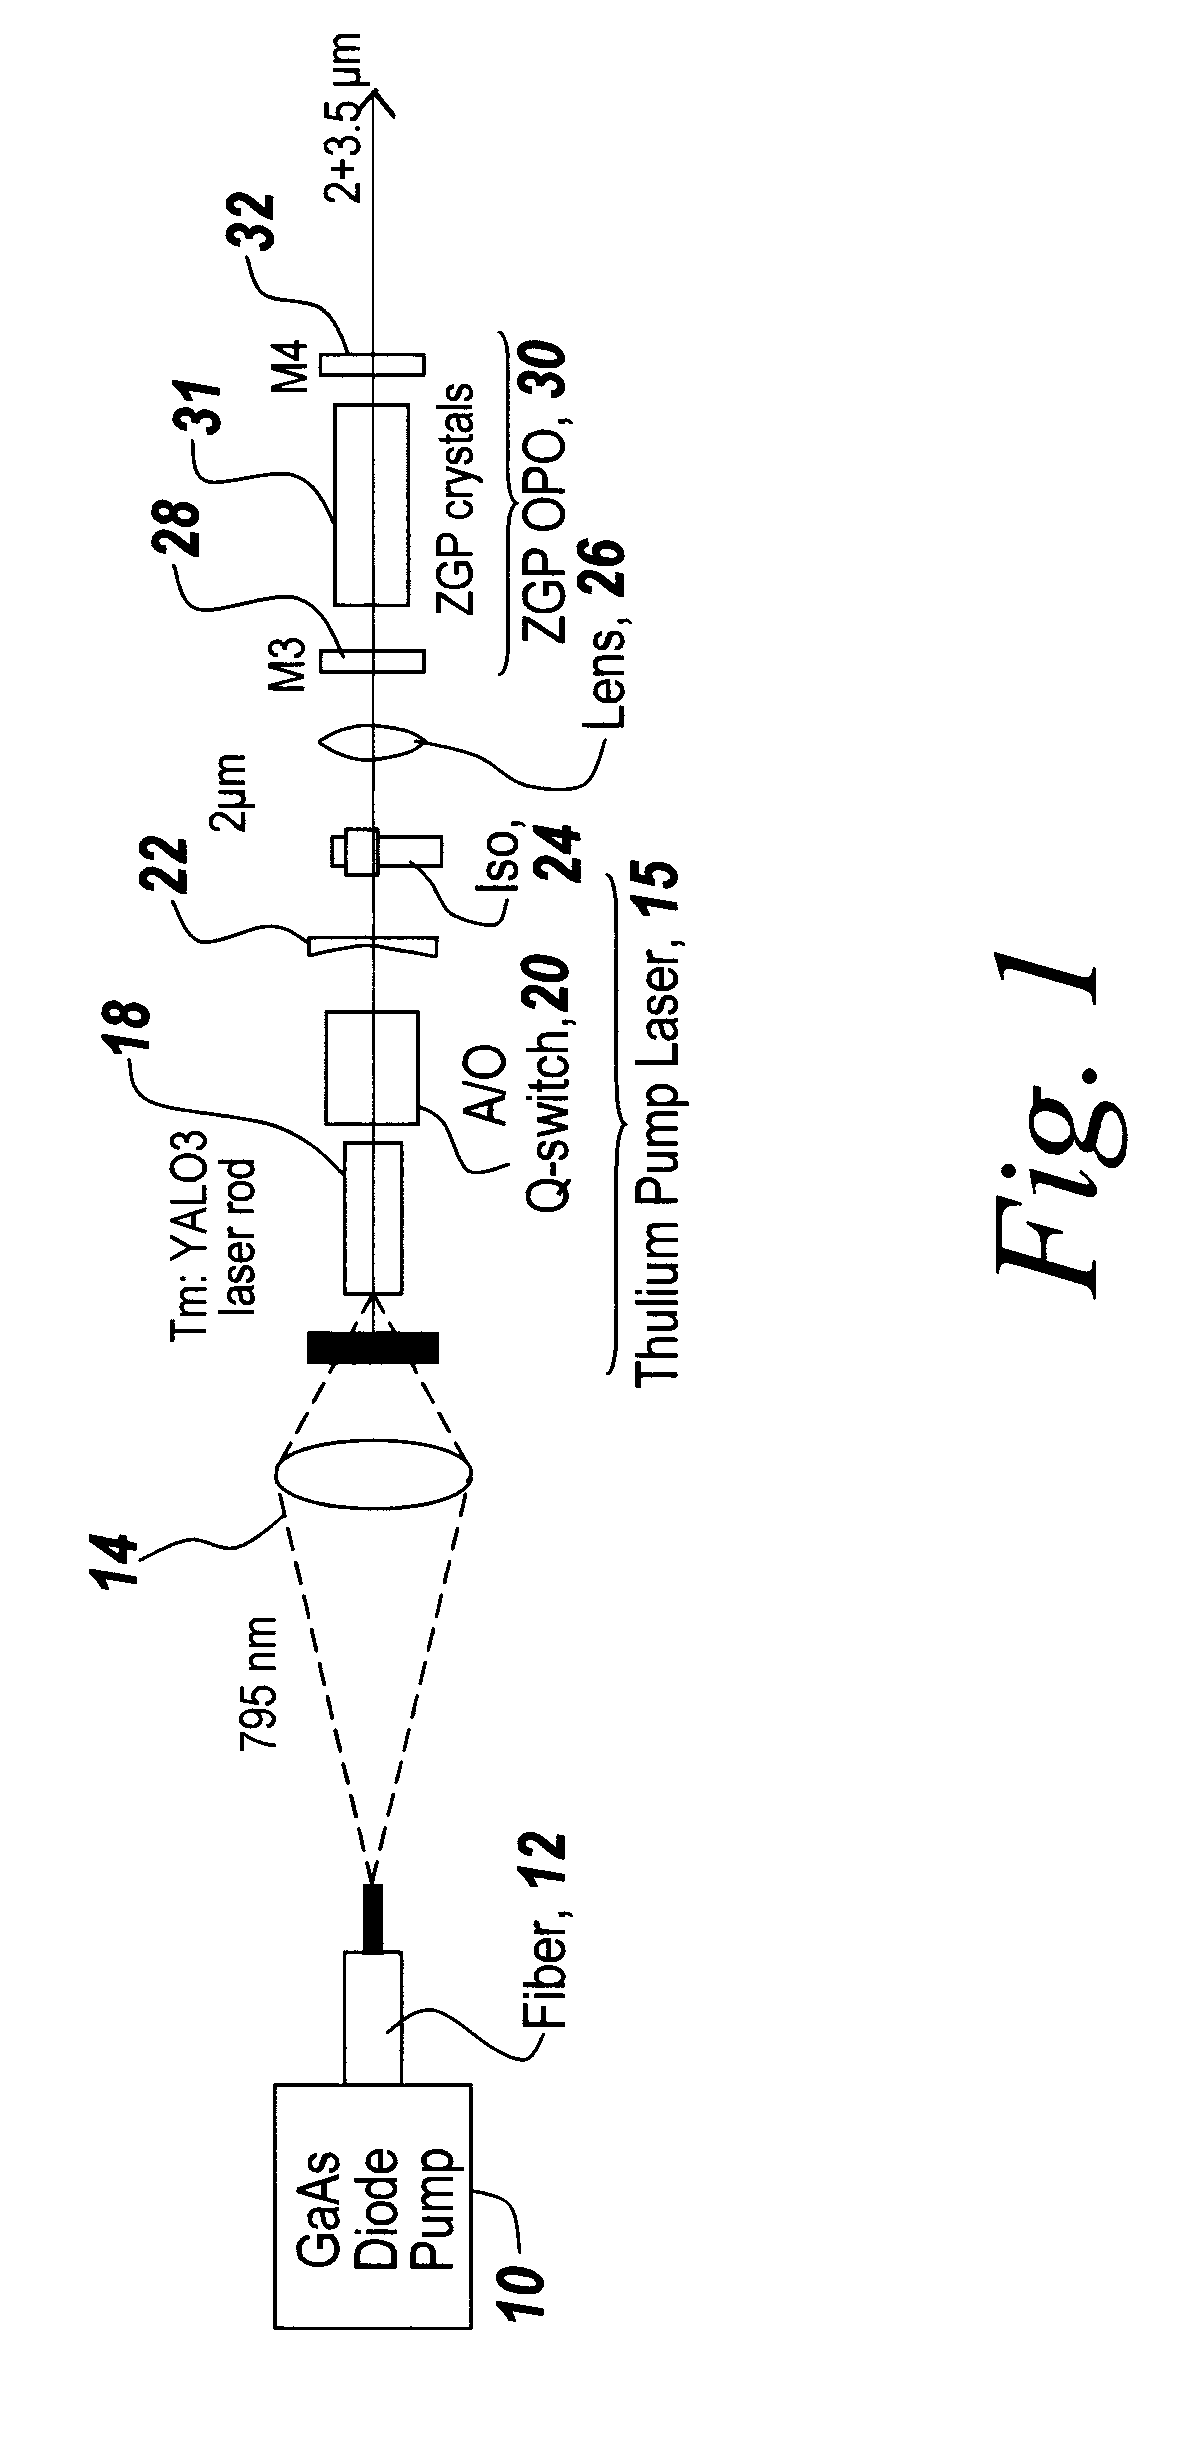 Thulium Laser Pumped Mid-IR Source With Multi-Spectral Line Output